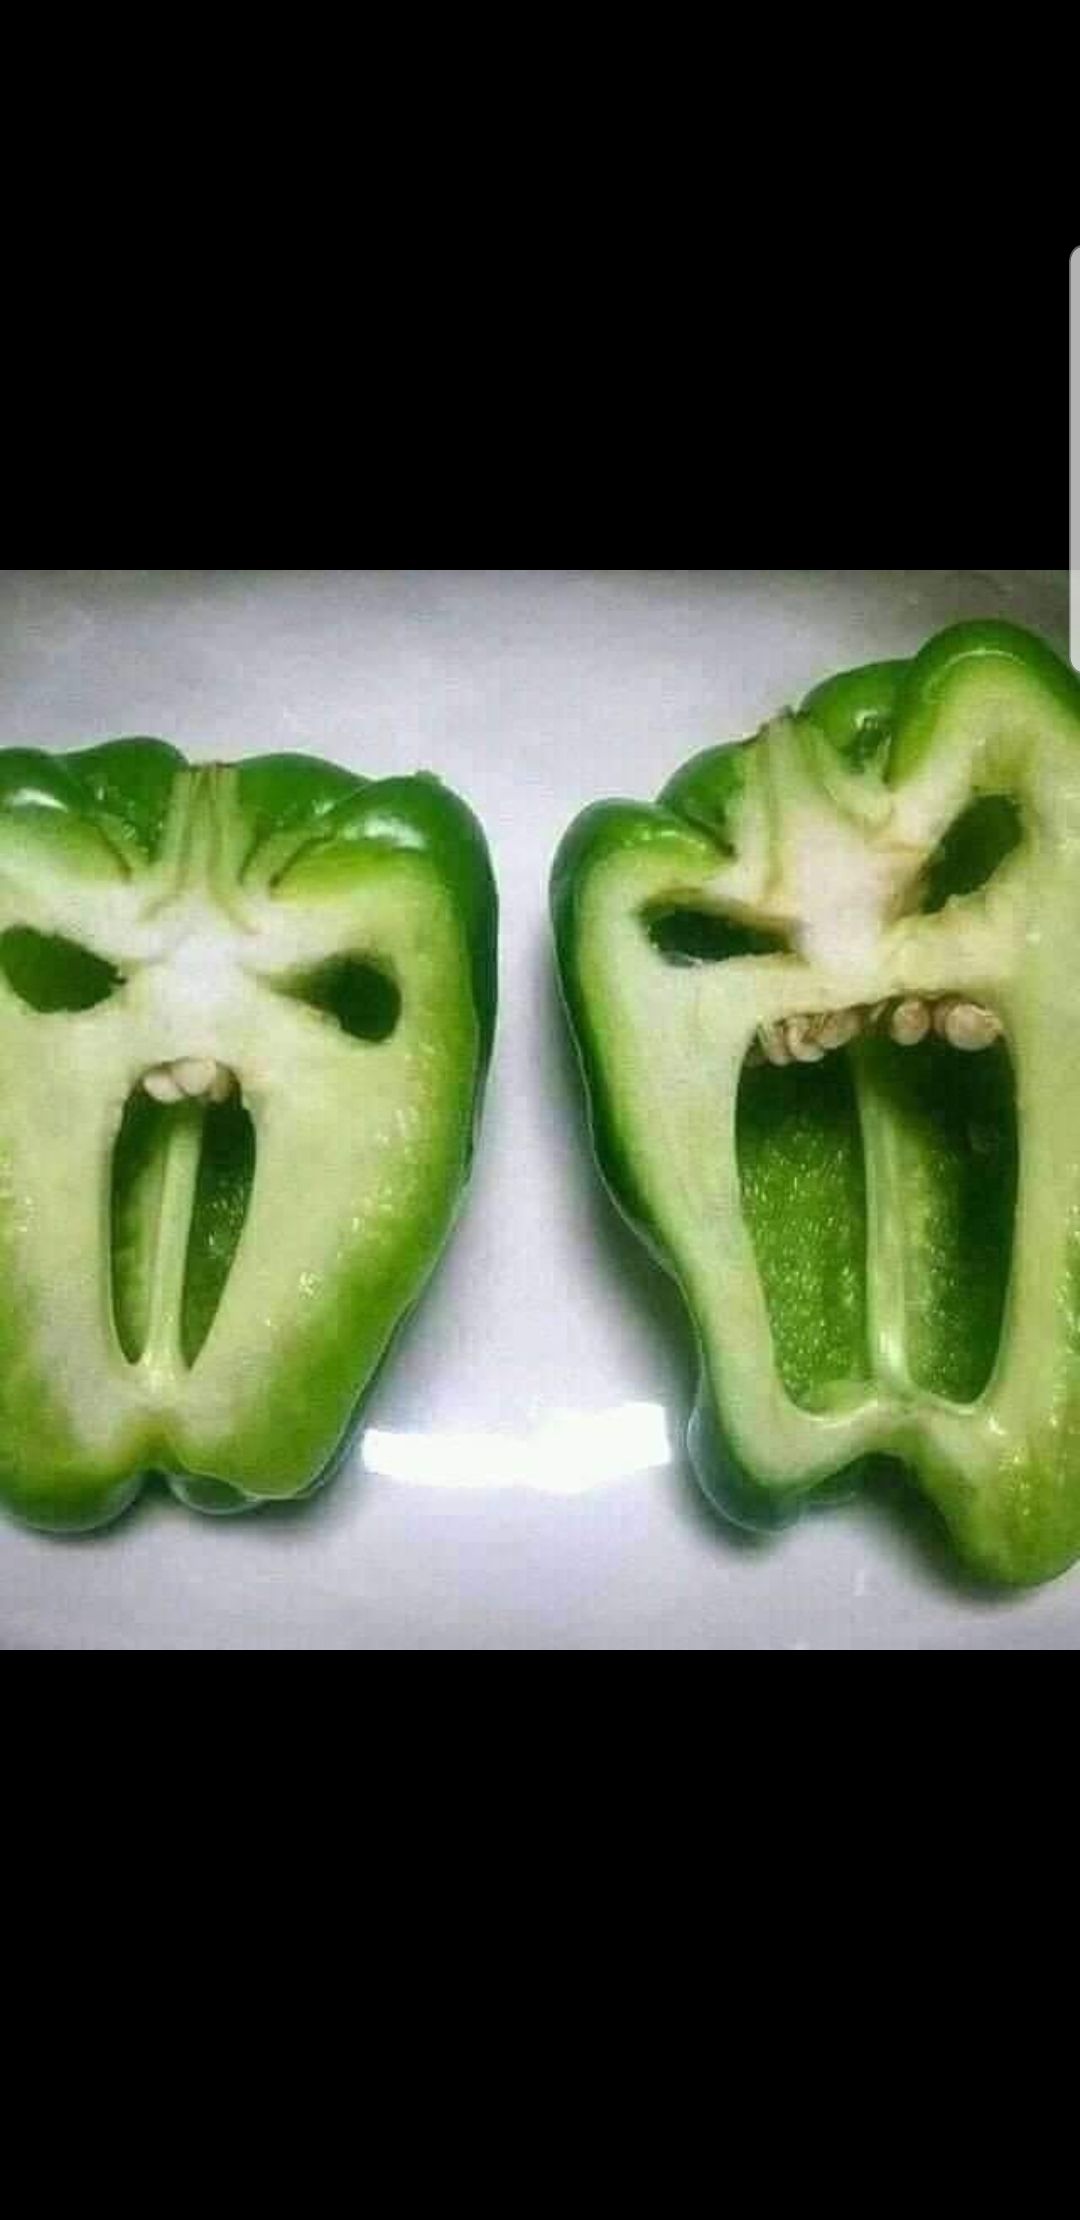 These angry capsicums